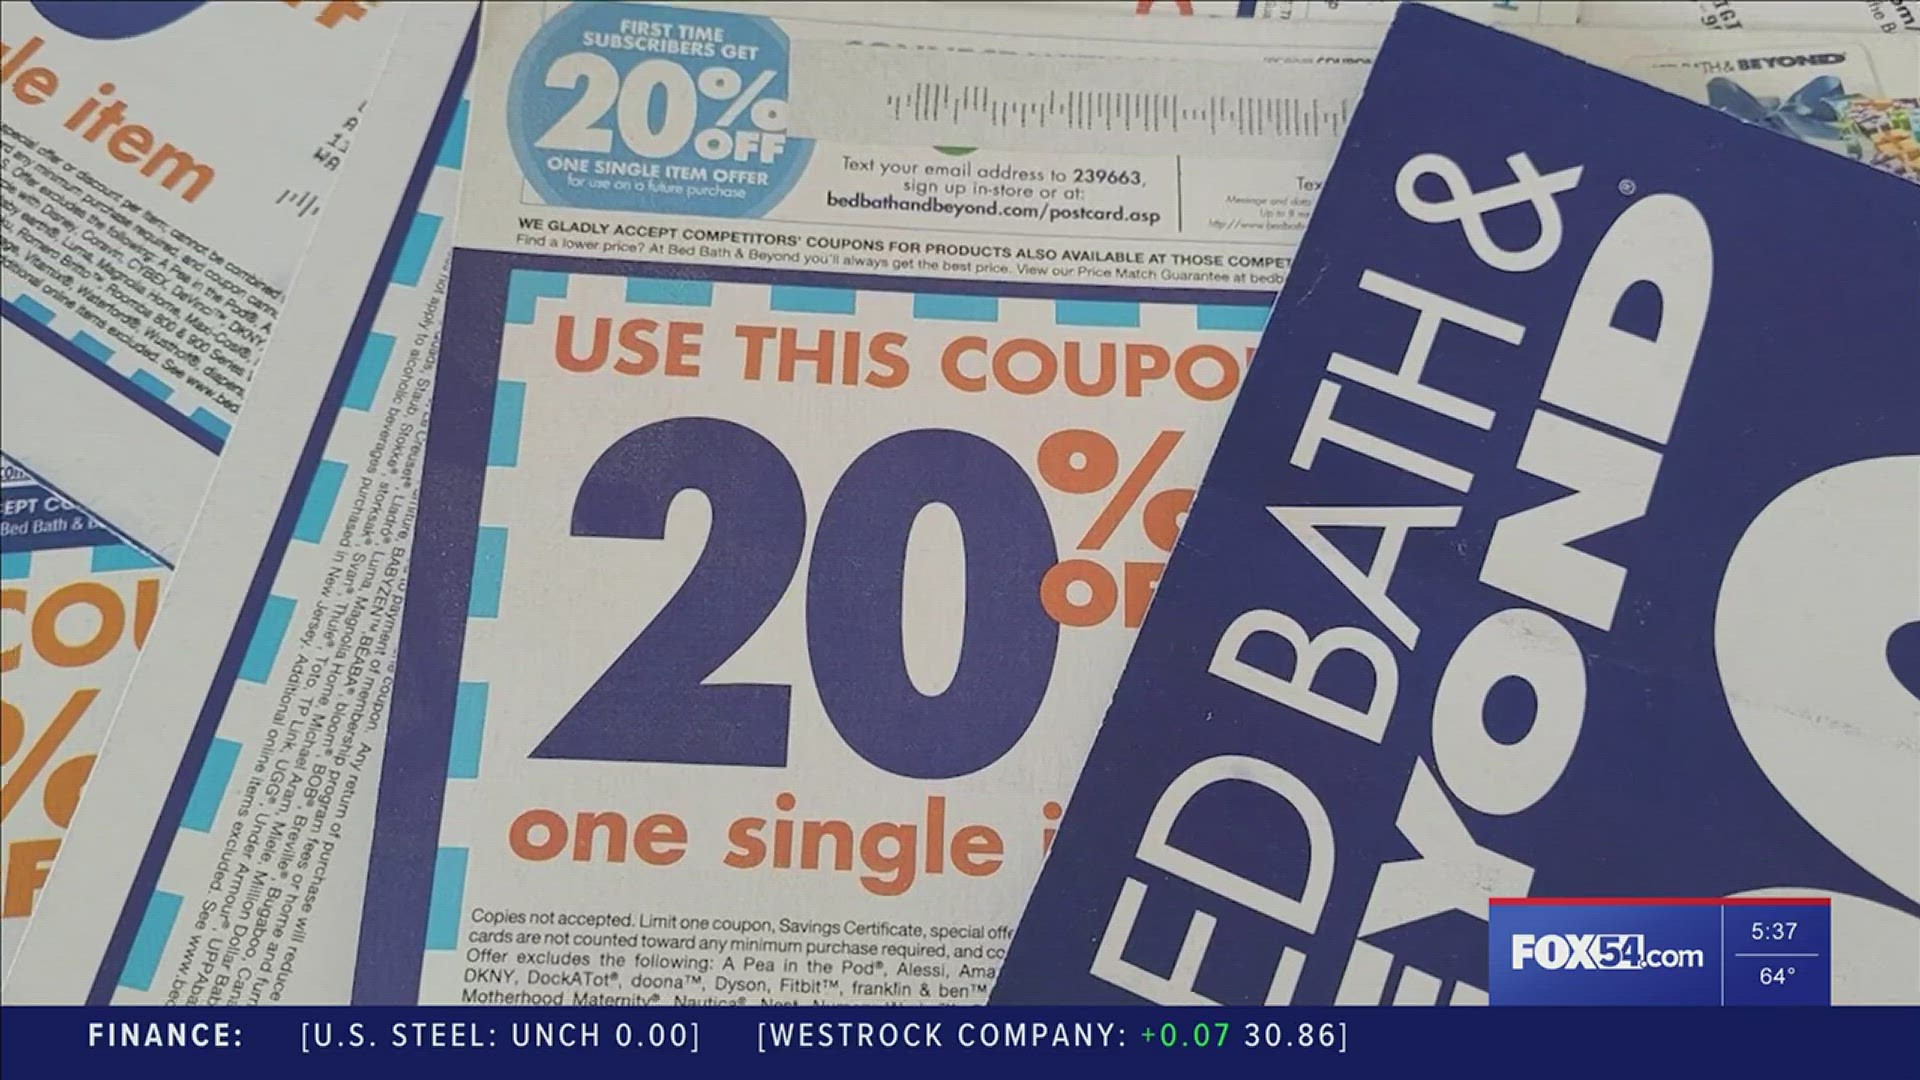 The home furnishings chain was renowned for its 'never-expiring' coupons. Well, they're about to, as our national VERIFY team explains.